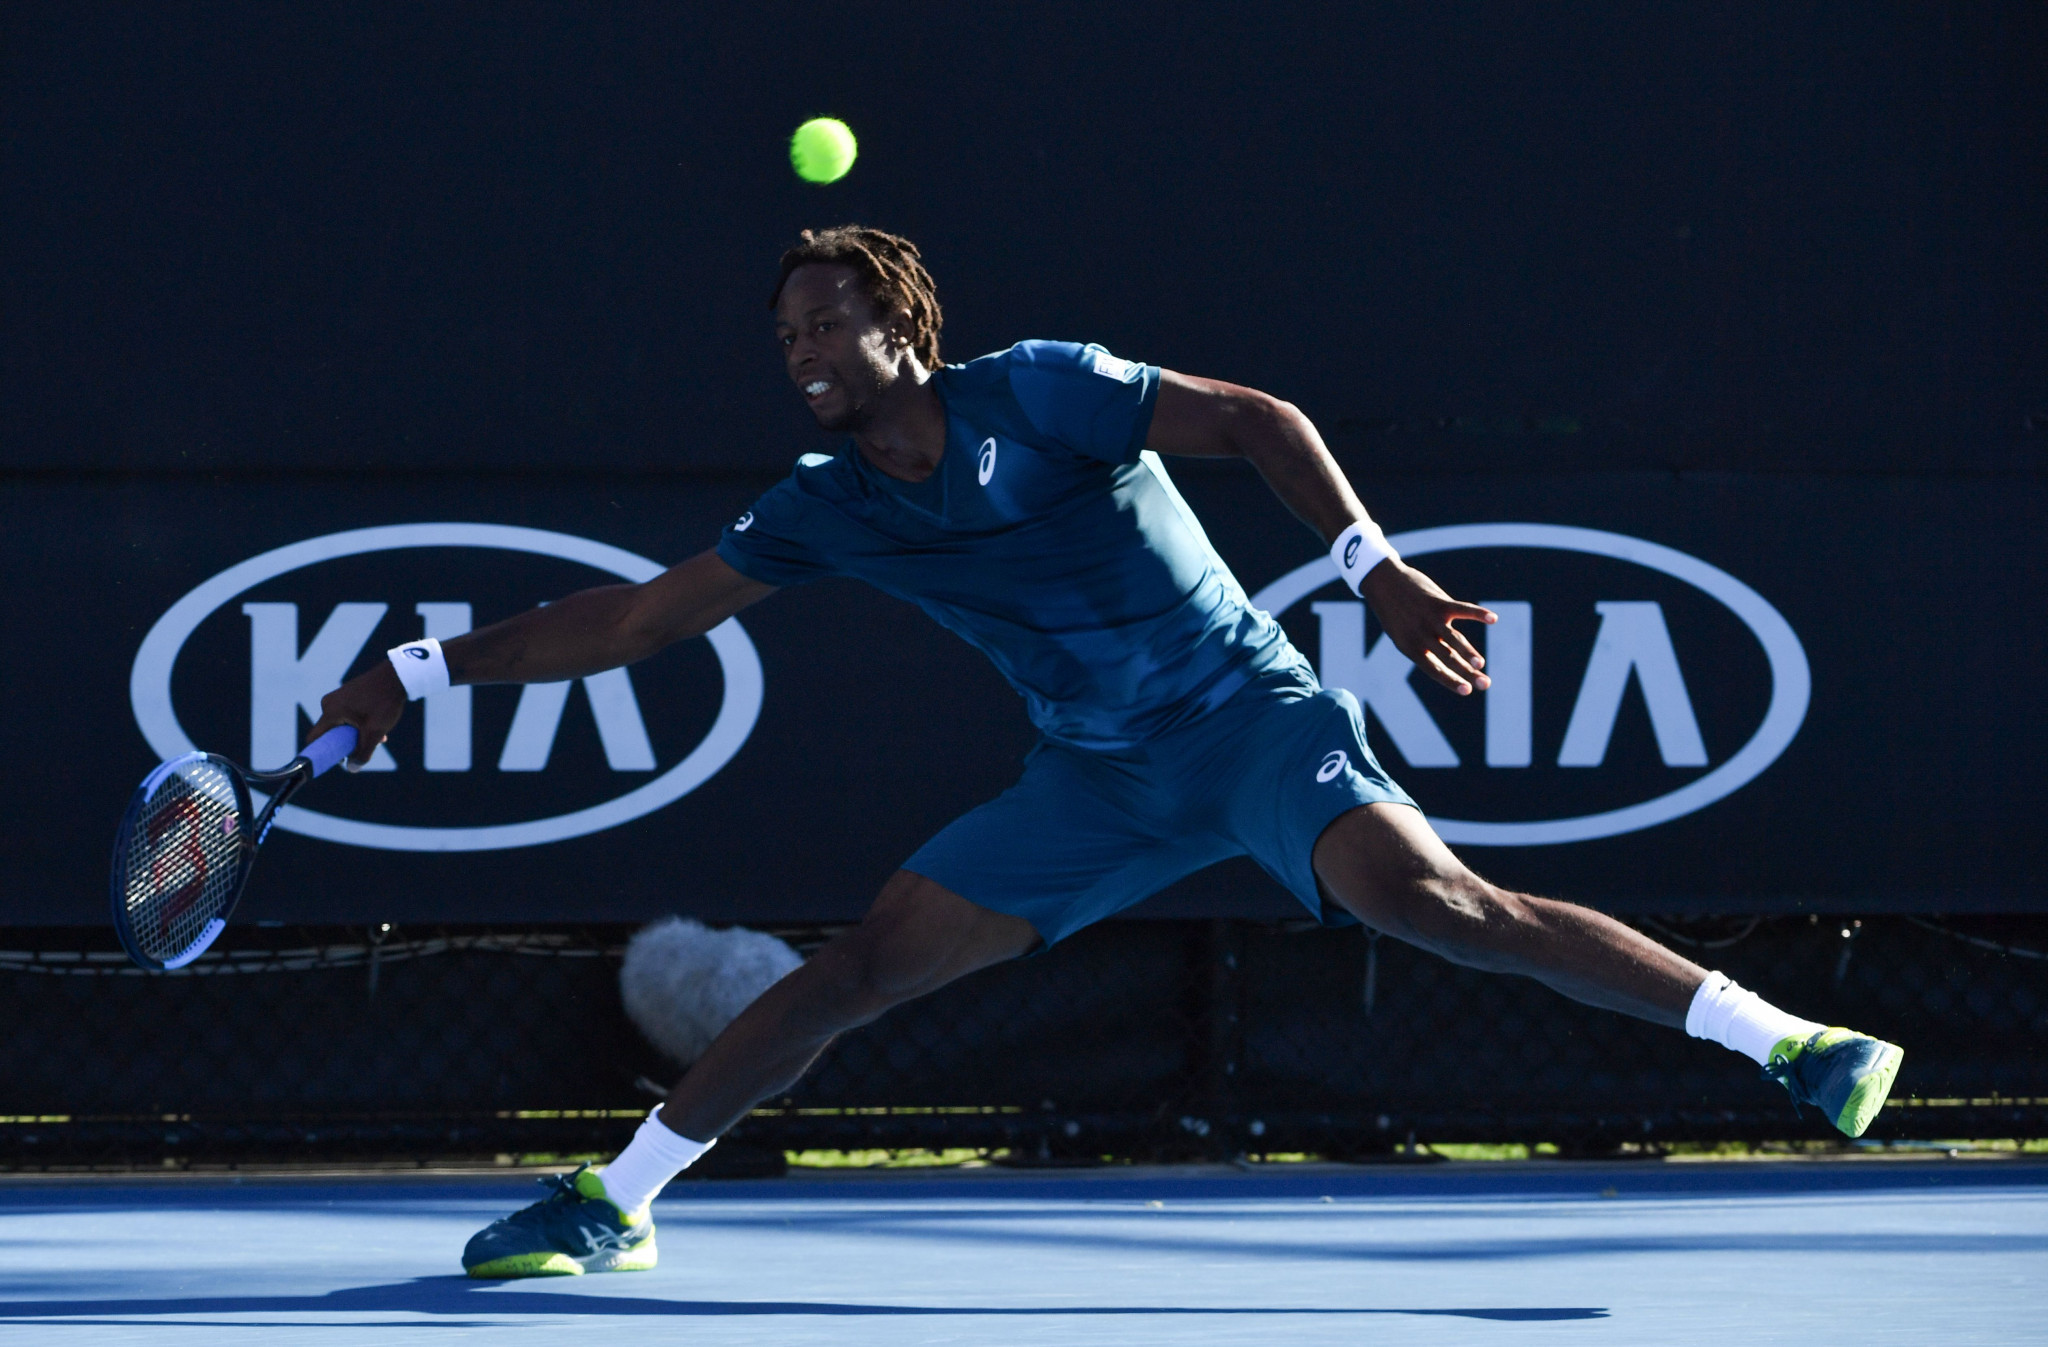 France's Gael Monfils went through in straight sets ©Getty Images